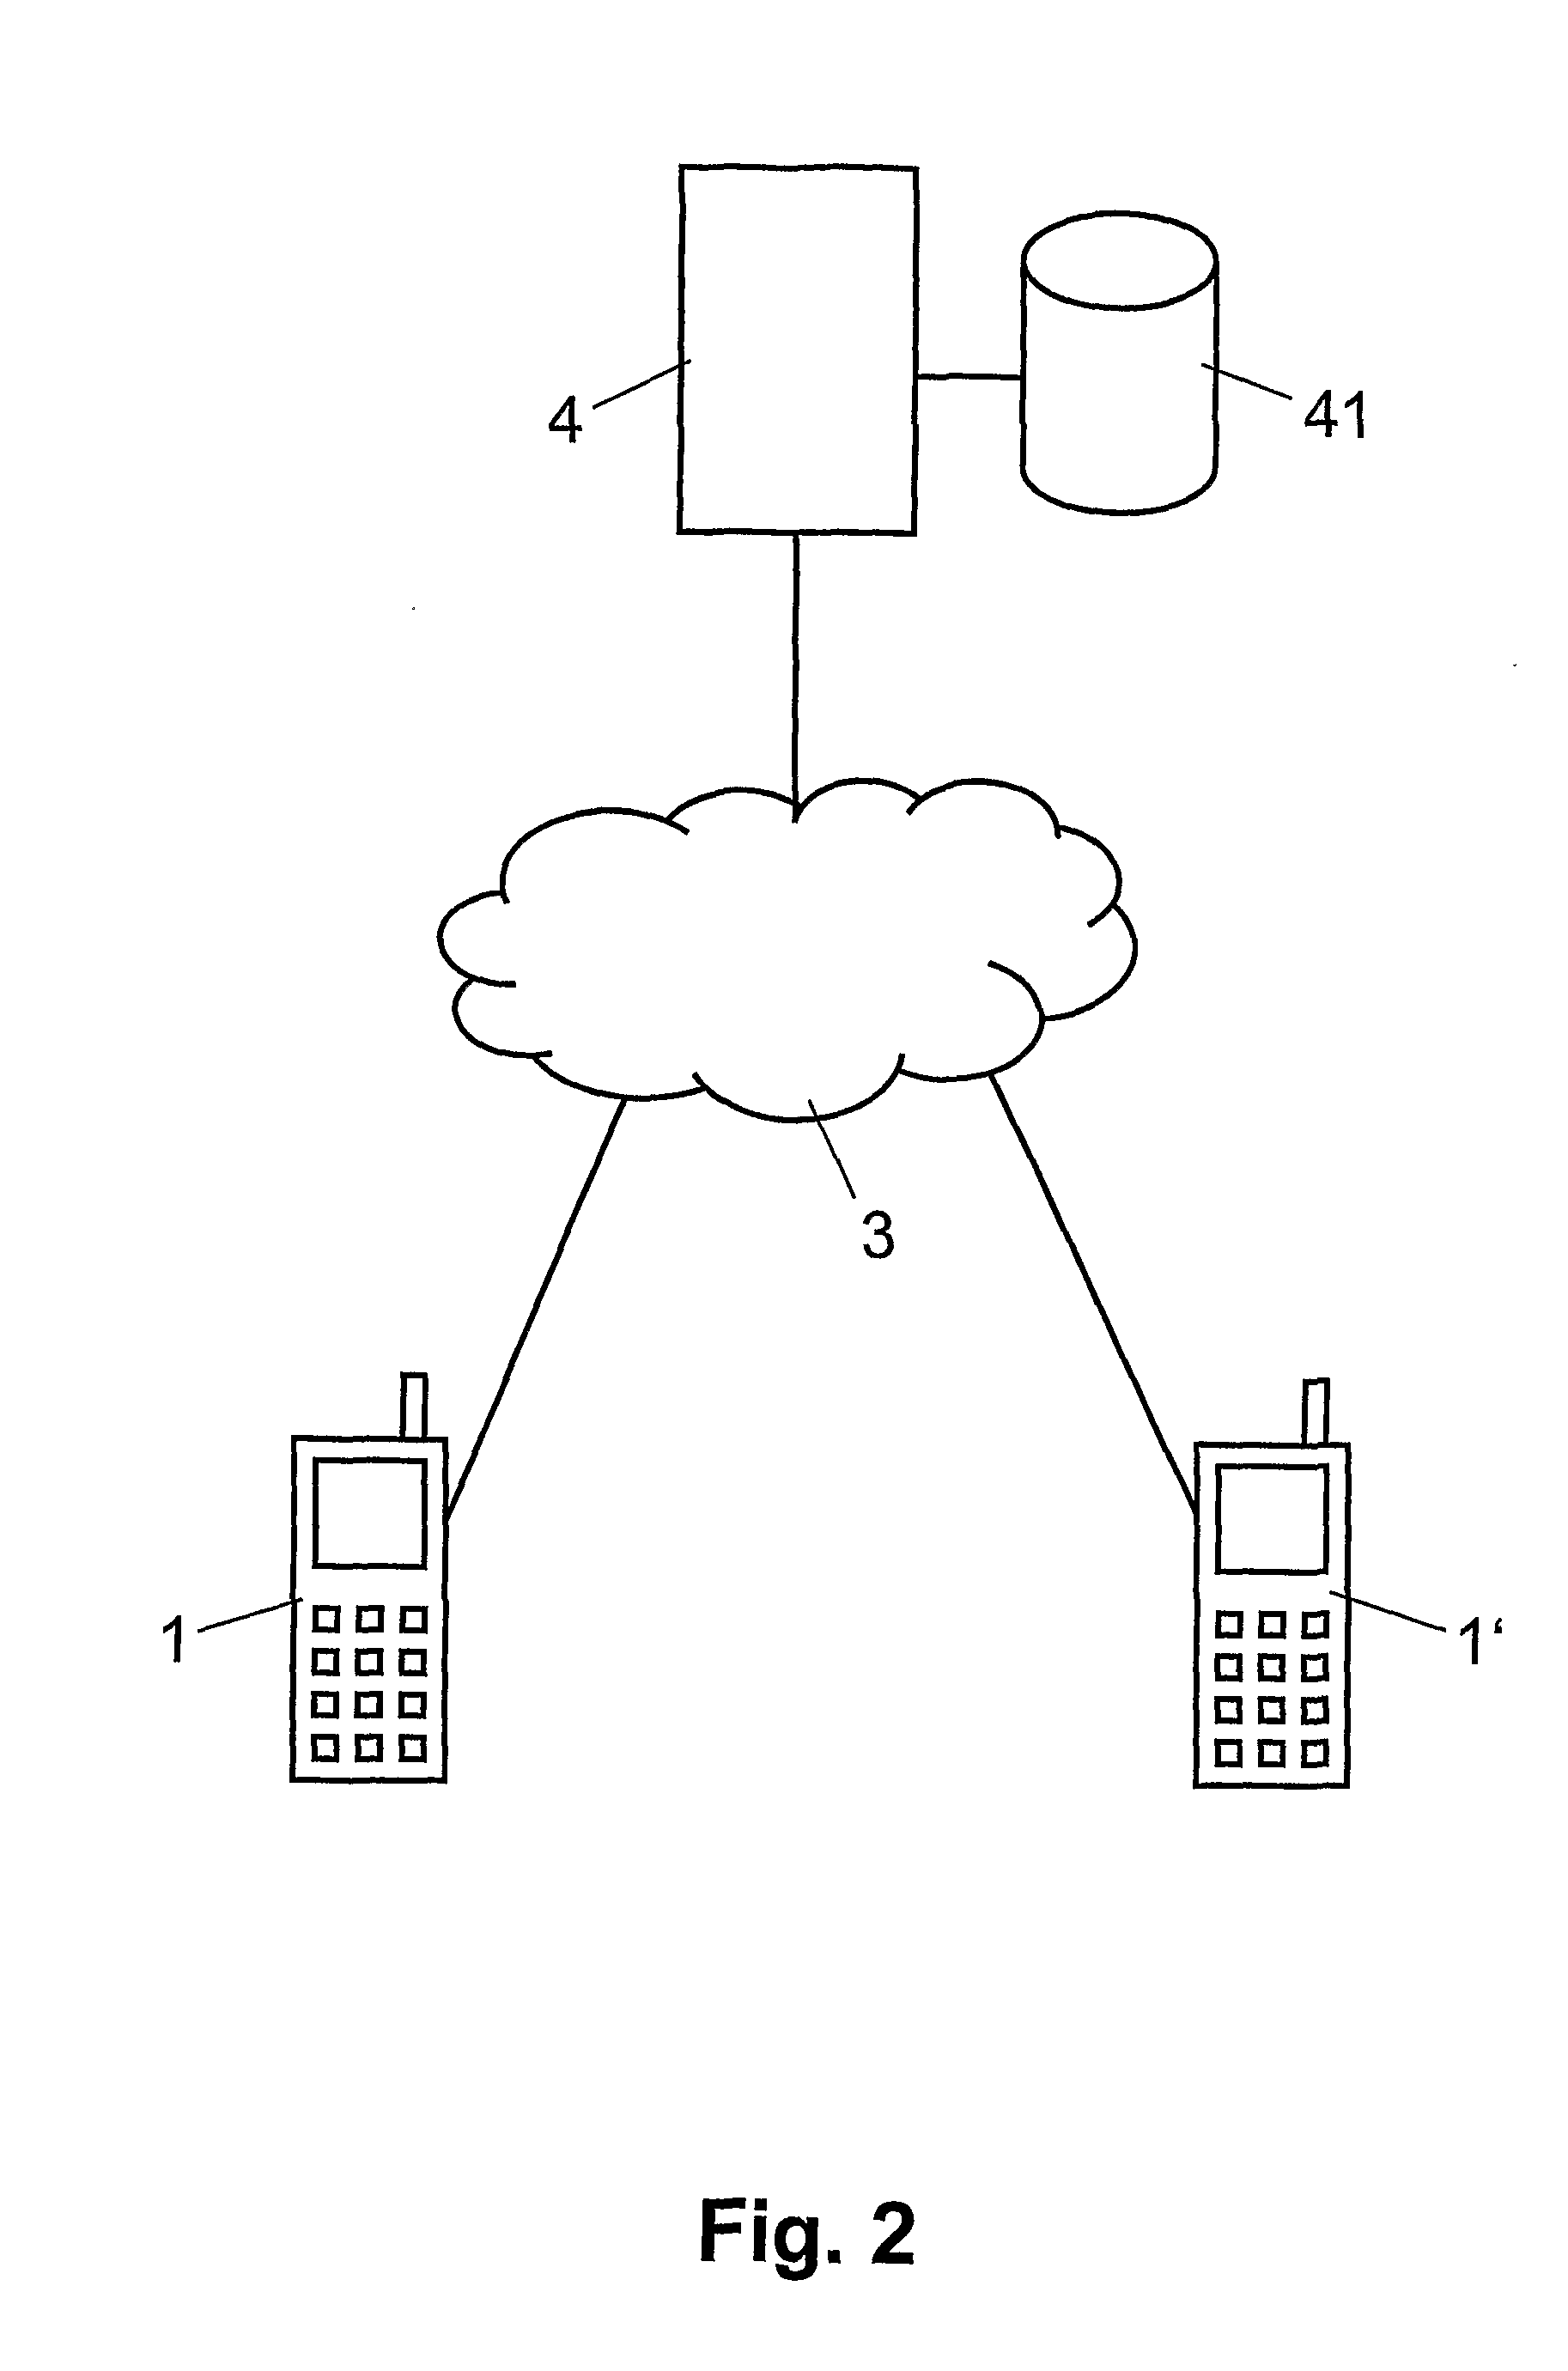 Method Of Executing An Application In A Mobile Device